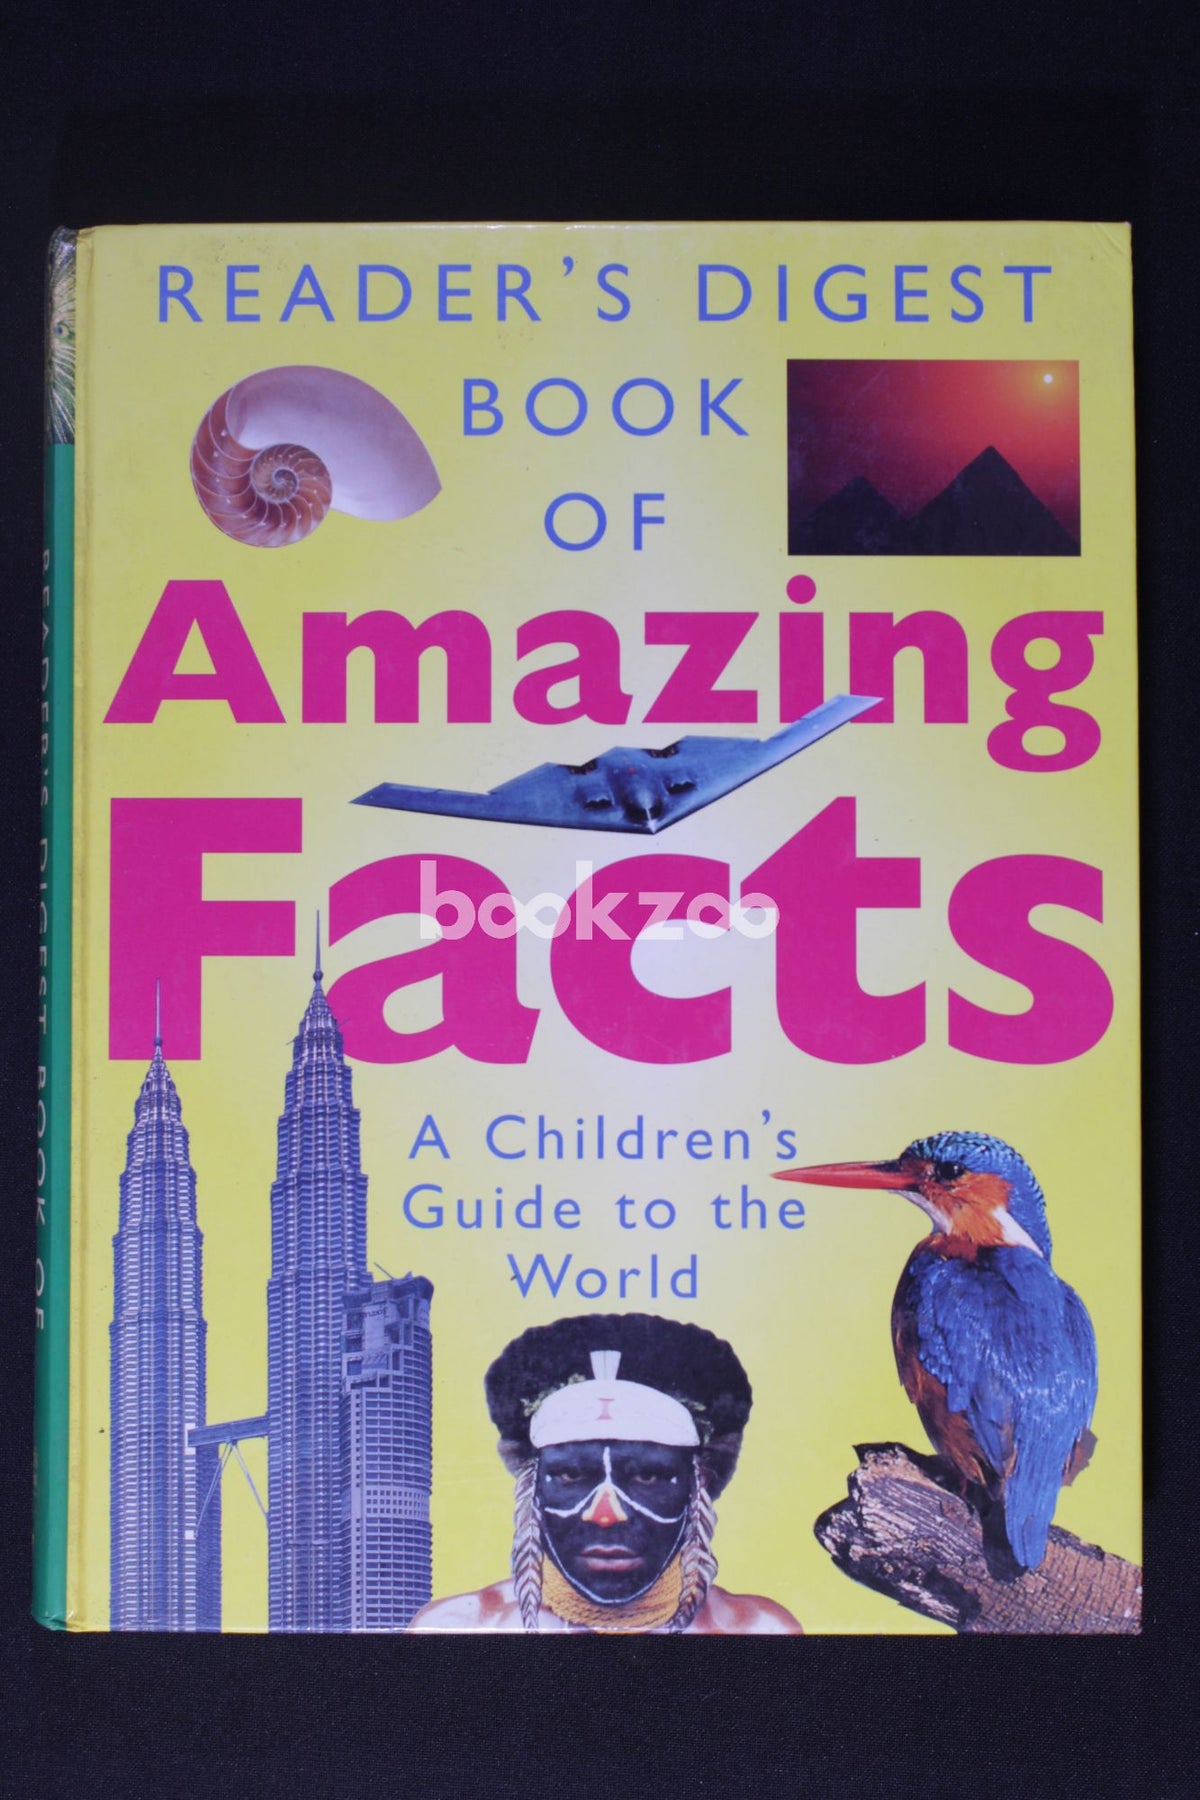 Buy Book of Amazing Facts A Children's Guide to the World by Reader's